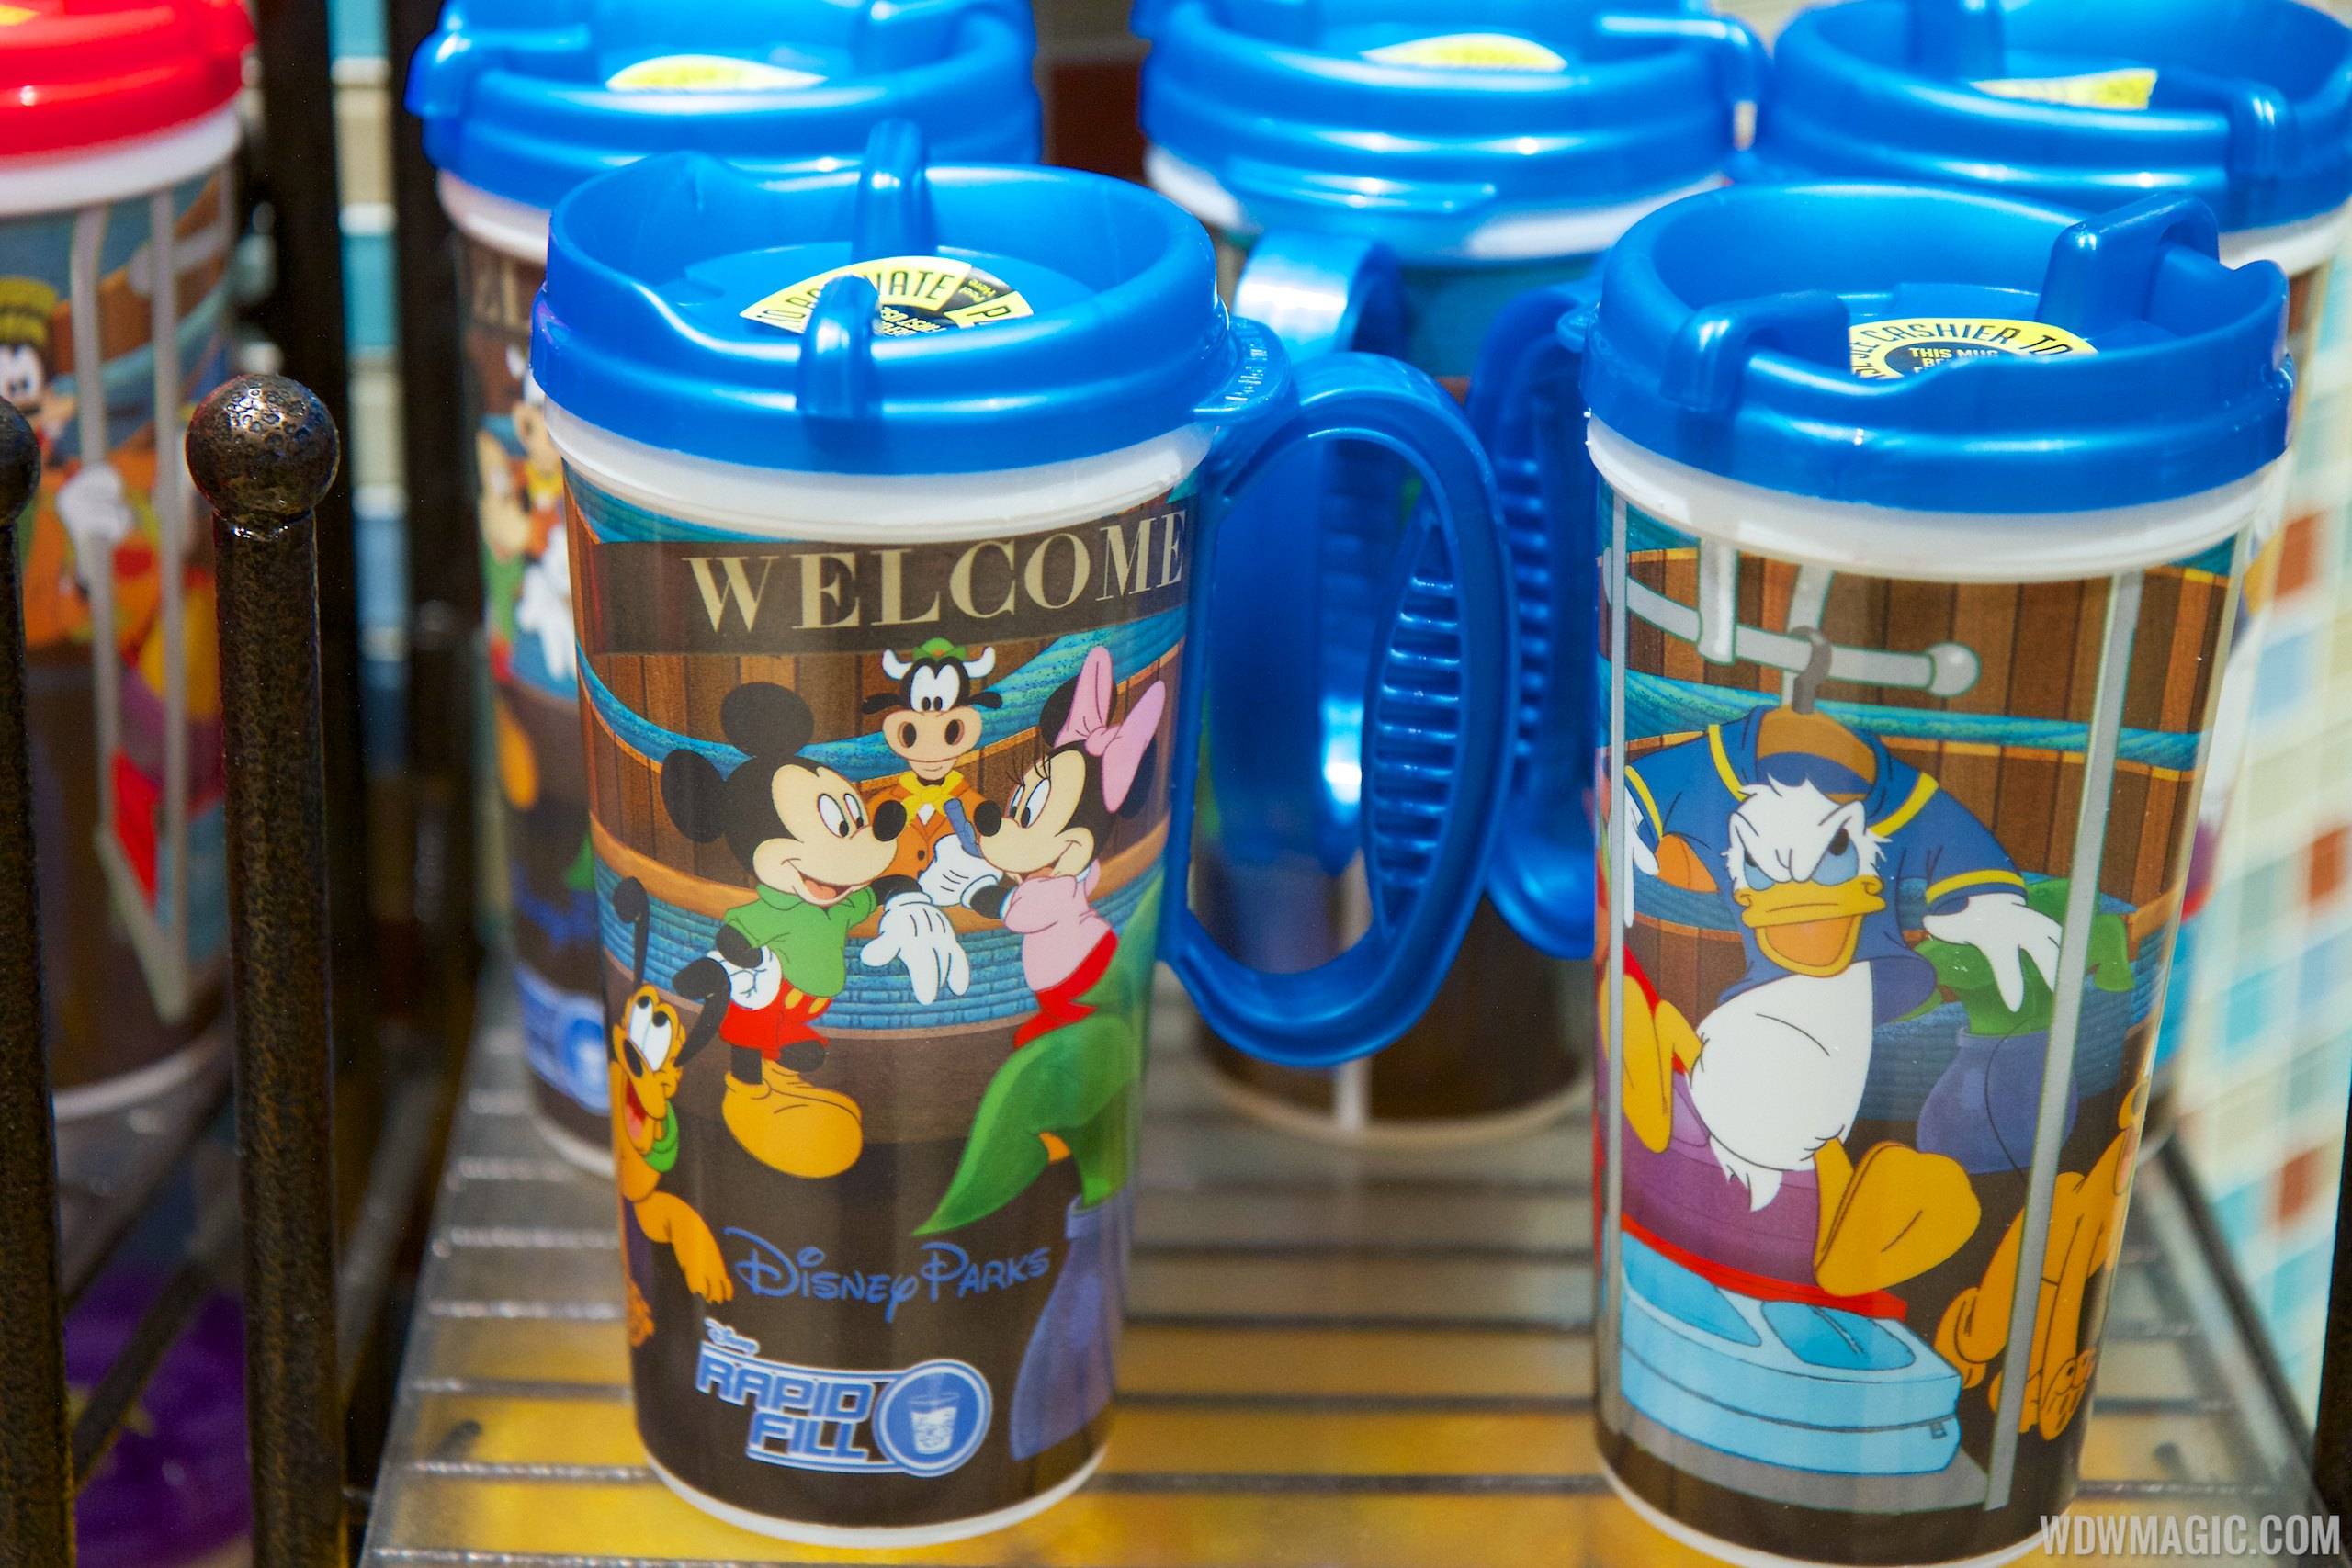 PHOTOS - New look Rapid Fill refillable mugs now appearing at resort quick service locations